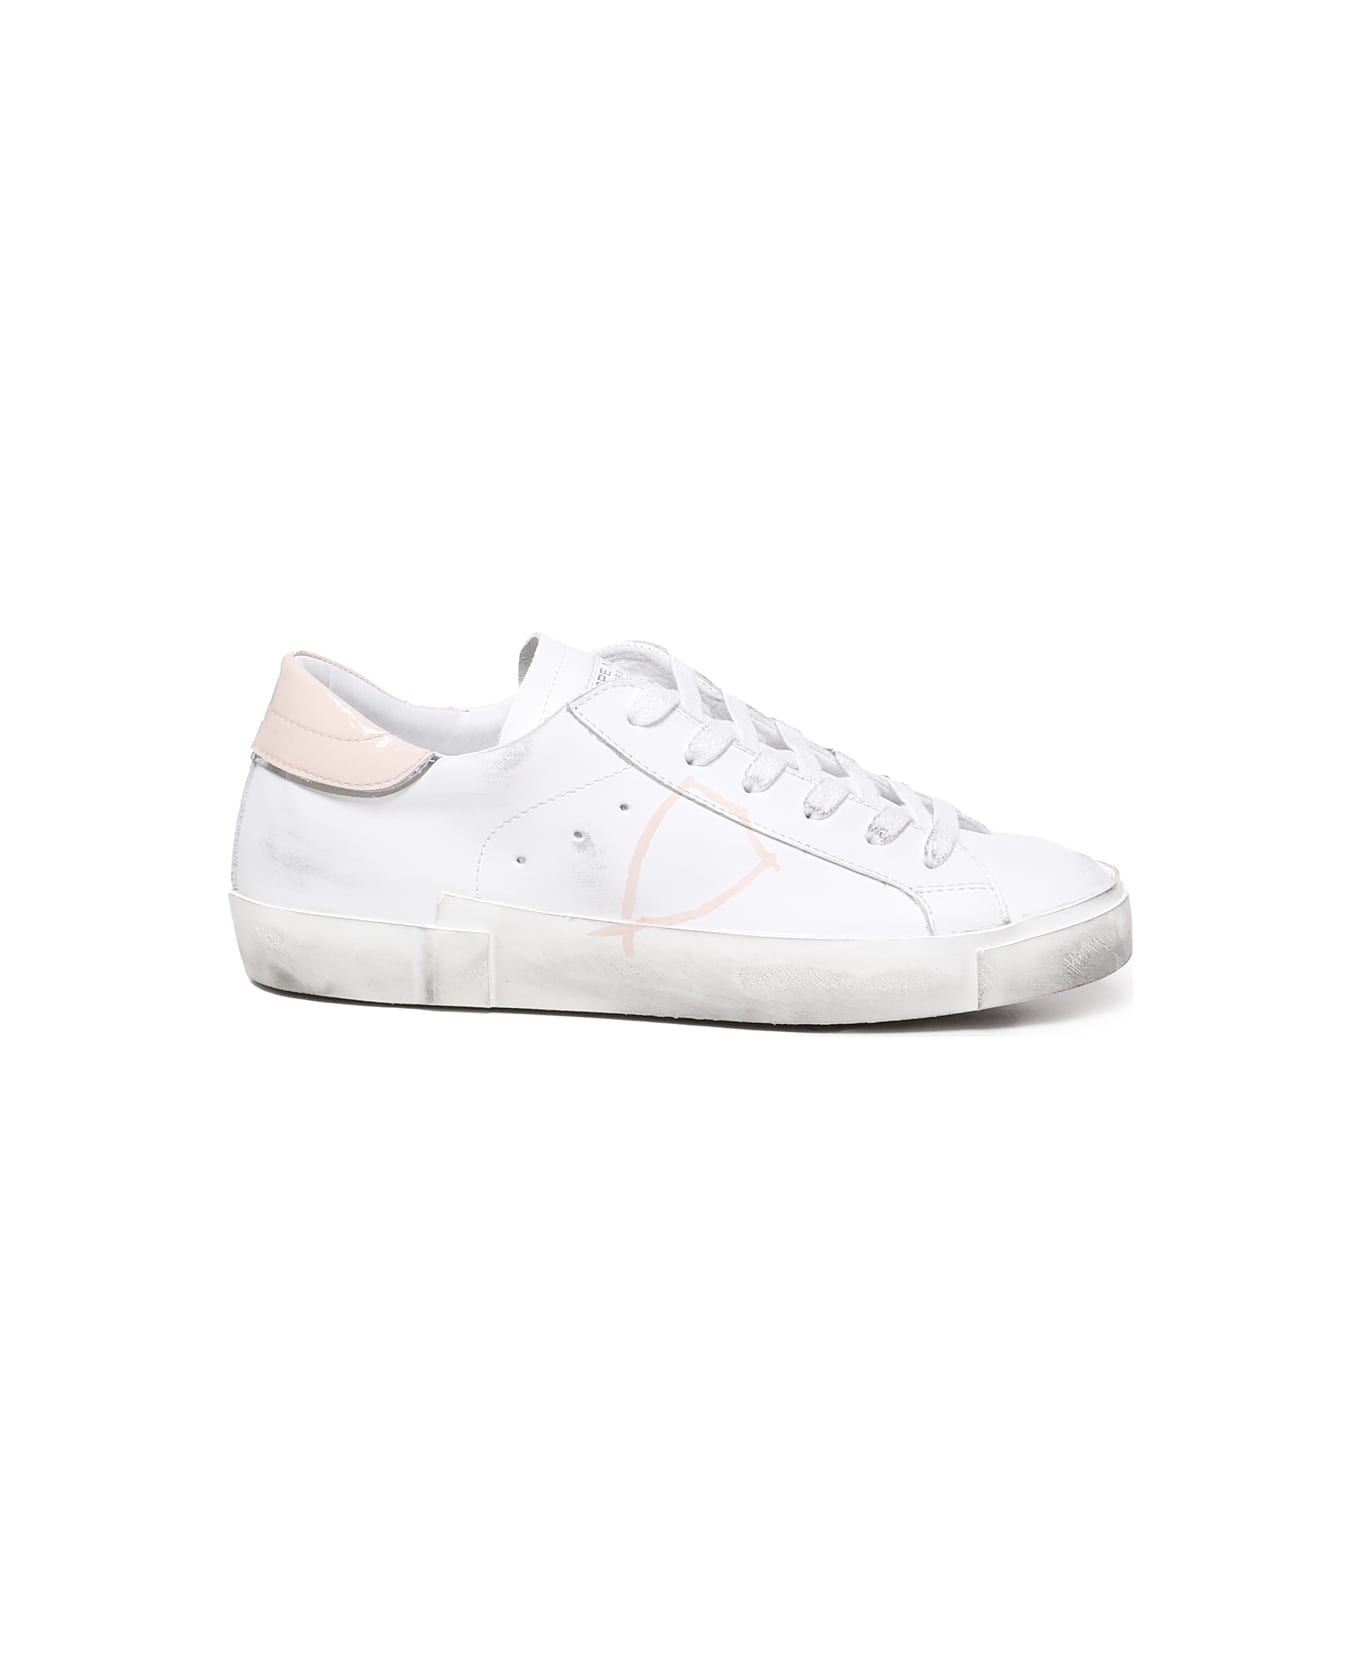 Philippe Model Prsx Casual Leather Sneaker - White, pink スニーカー